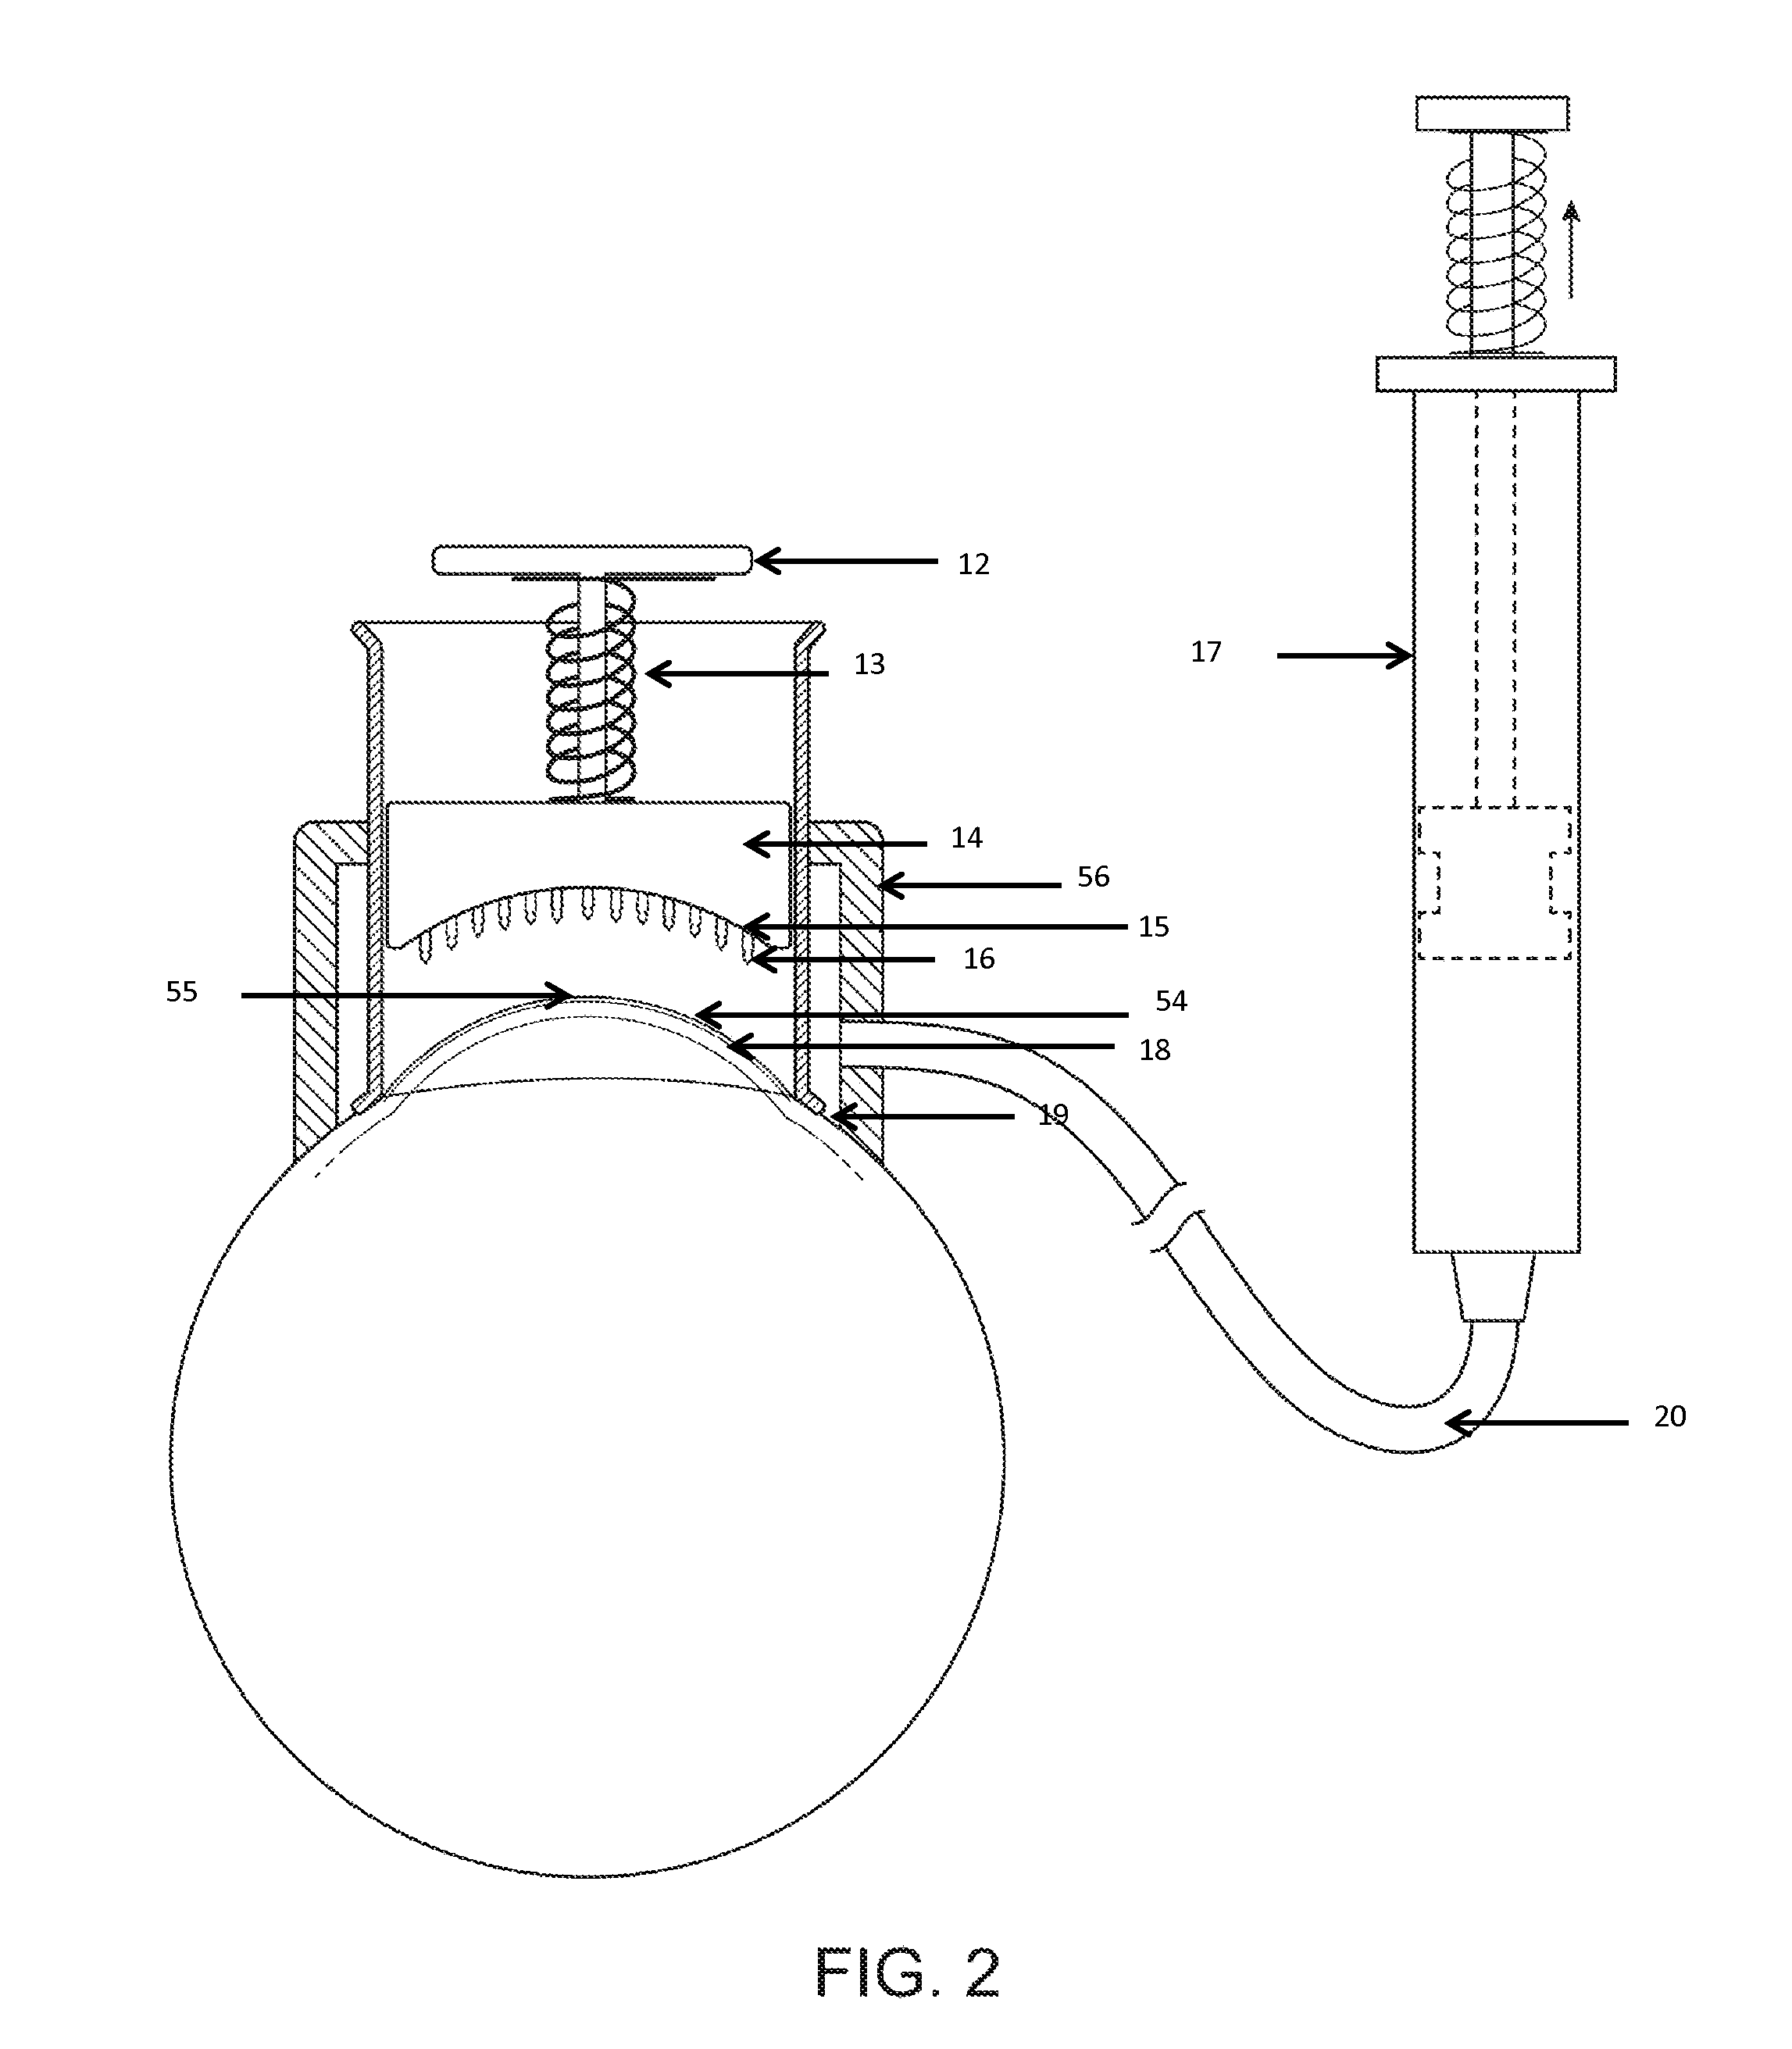 Method and apparatus for the delivery of photo-chemical (cross-linking) treatment to corneal tissue